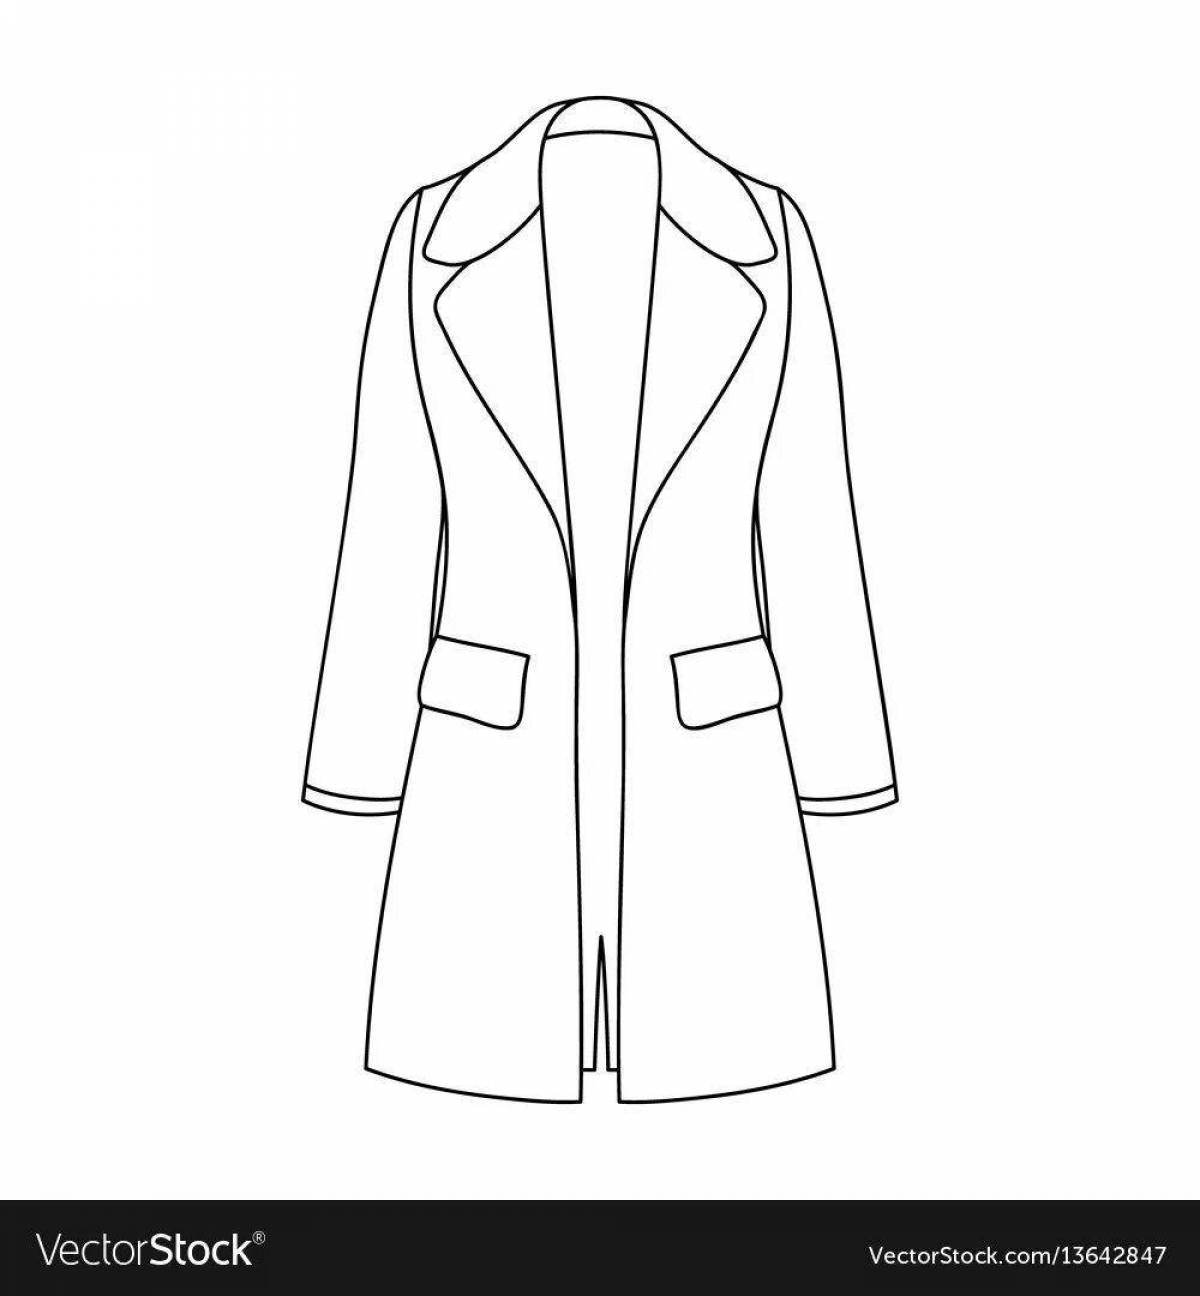 Coloring page funny outerwear